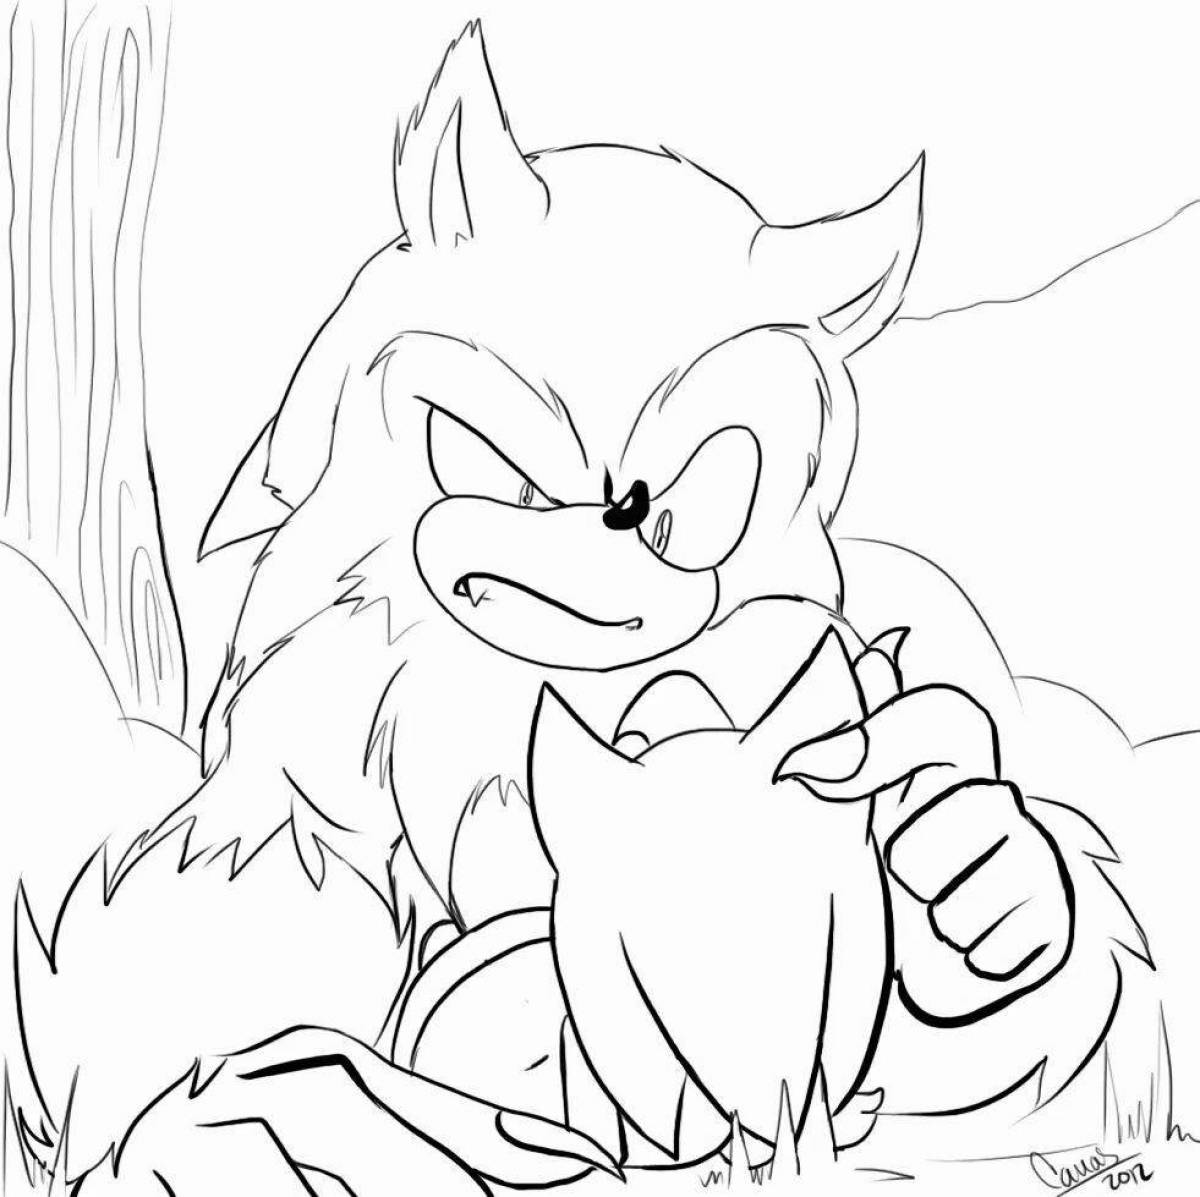 Charming sonic werewolf coloring book